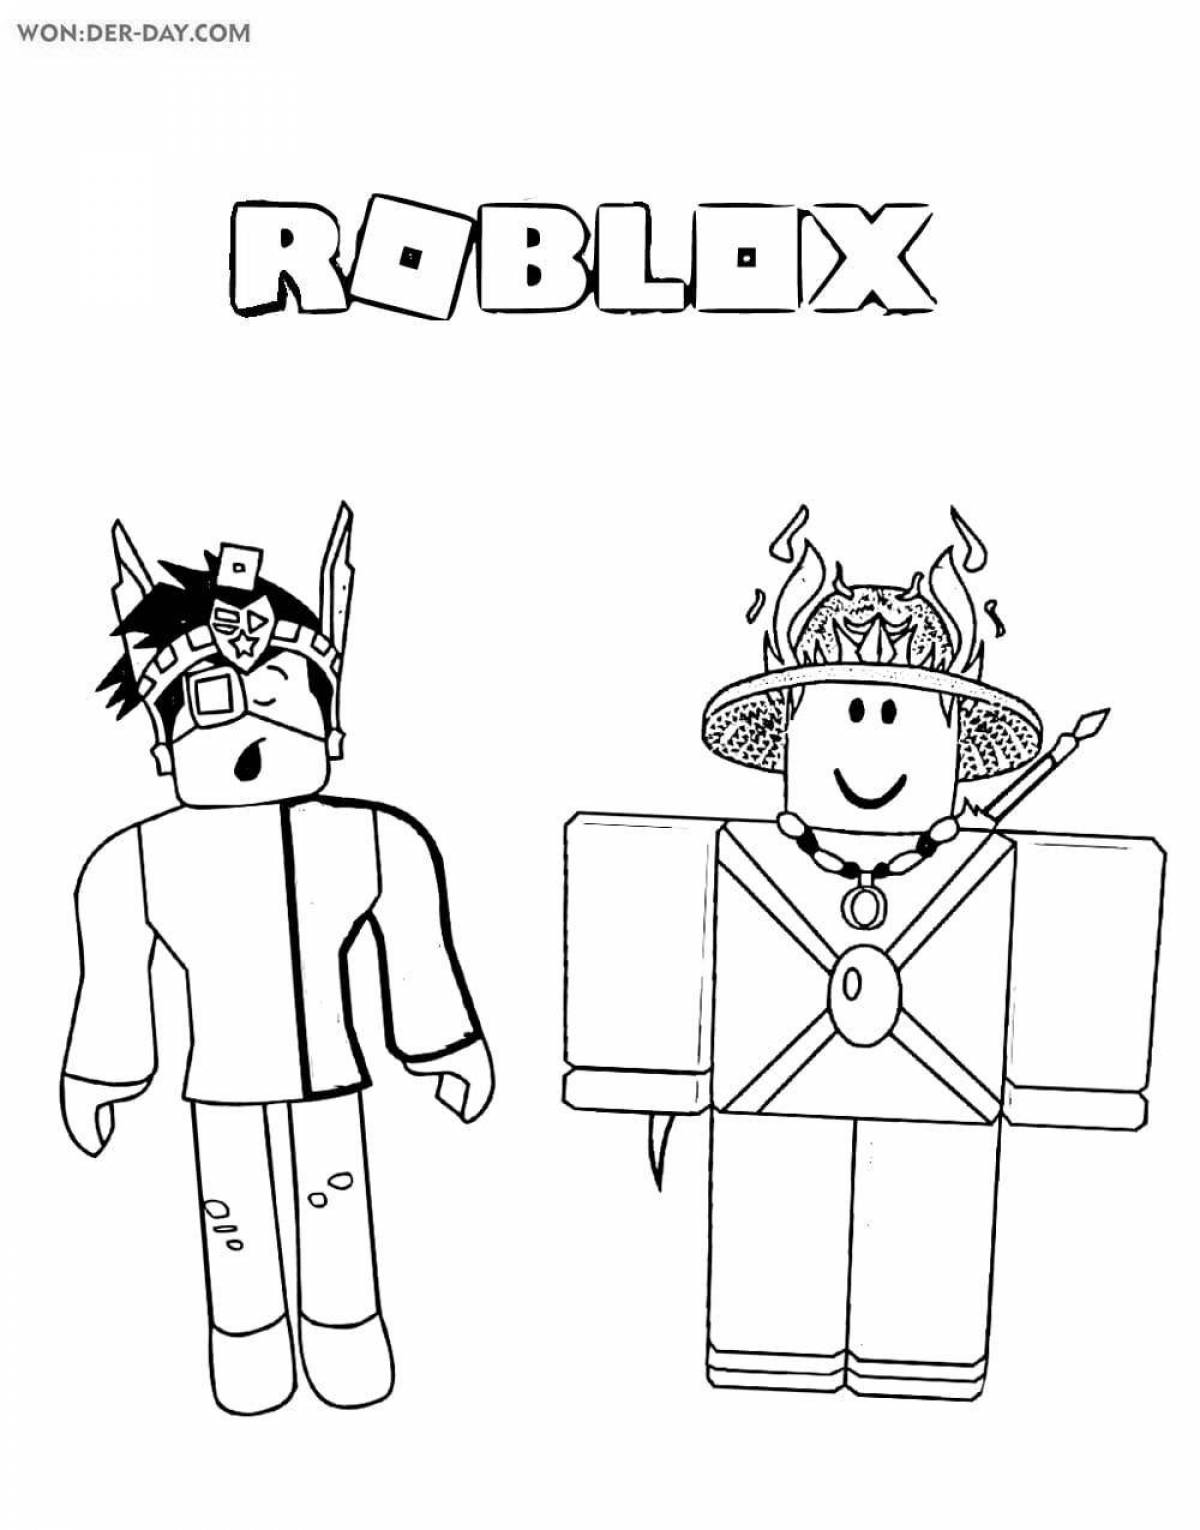 Color frenzy roblox ler4eg coloring